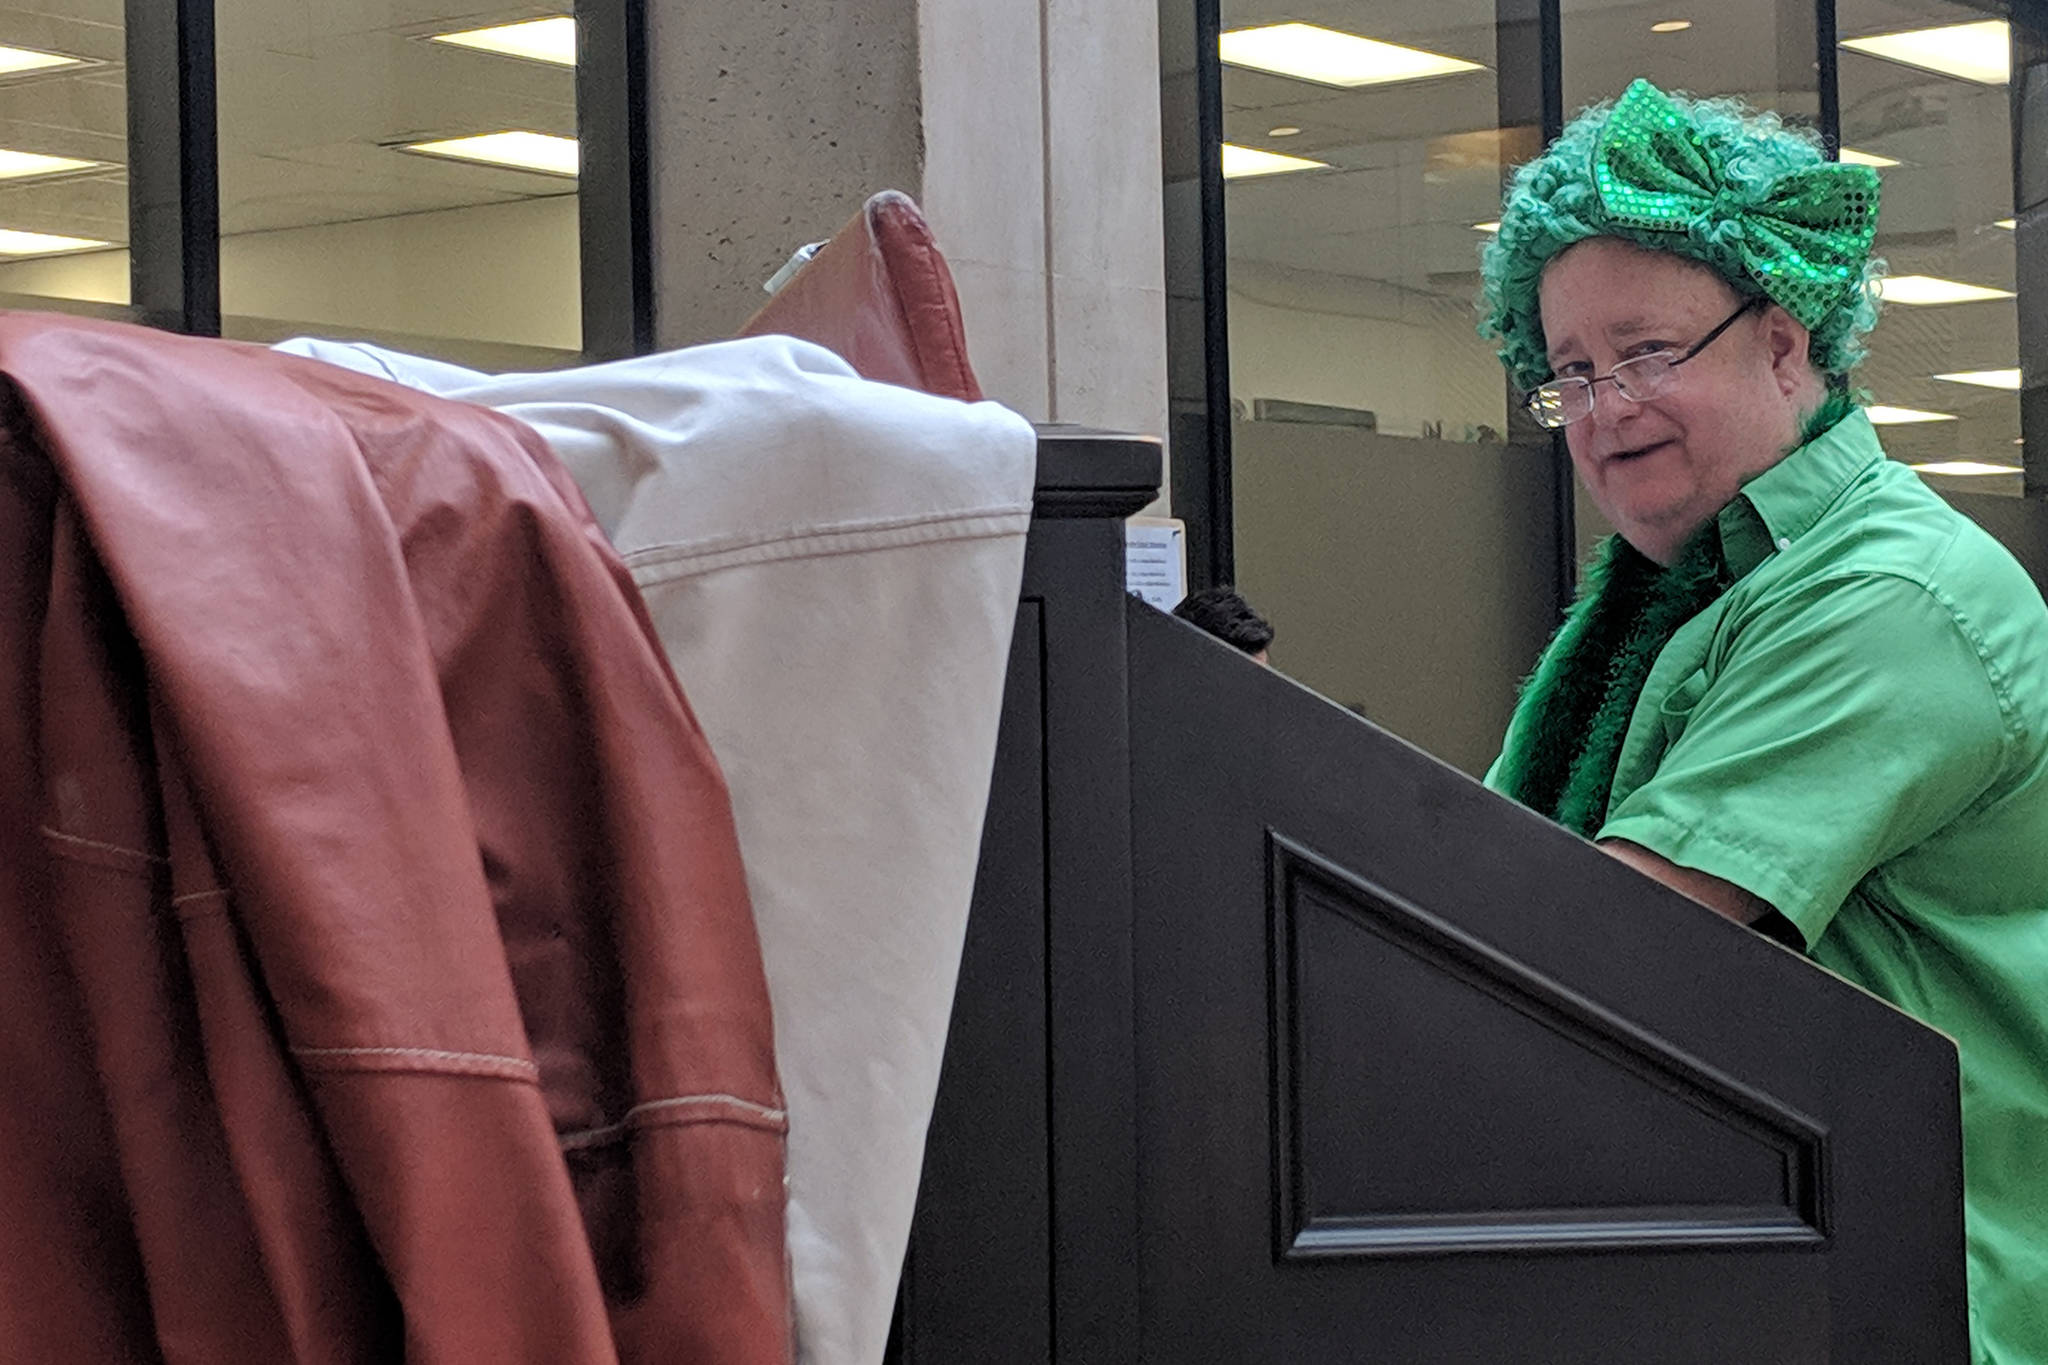 T.J. Duffy dons seasonal garb while playing the 91-year-old Kimball pipe organ Friday, March 15, 2019. (Ben Hohenstatt | Capital City Weekly)